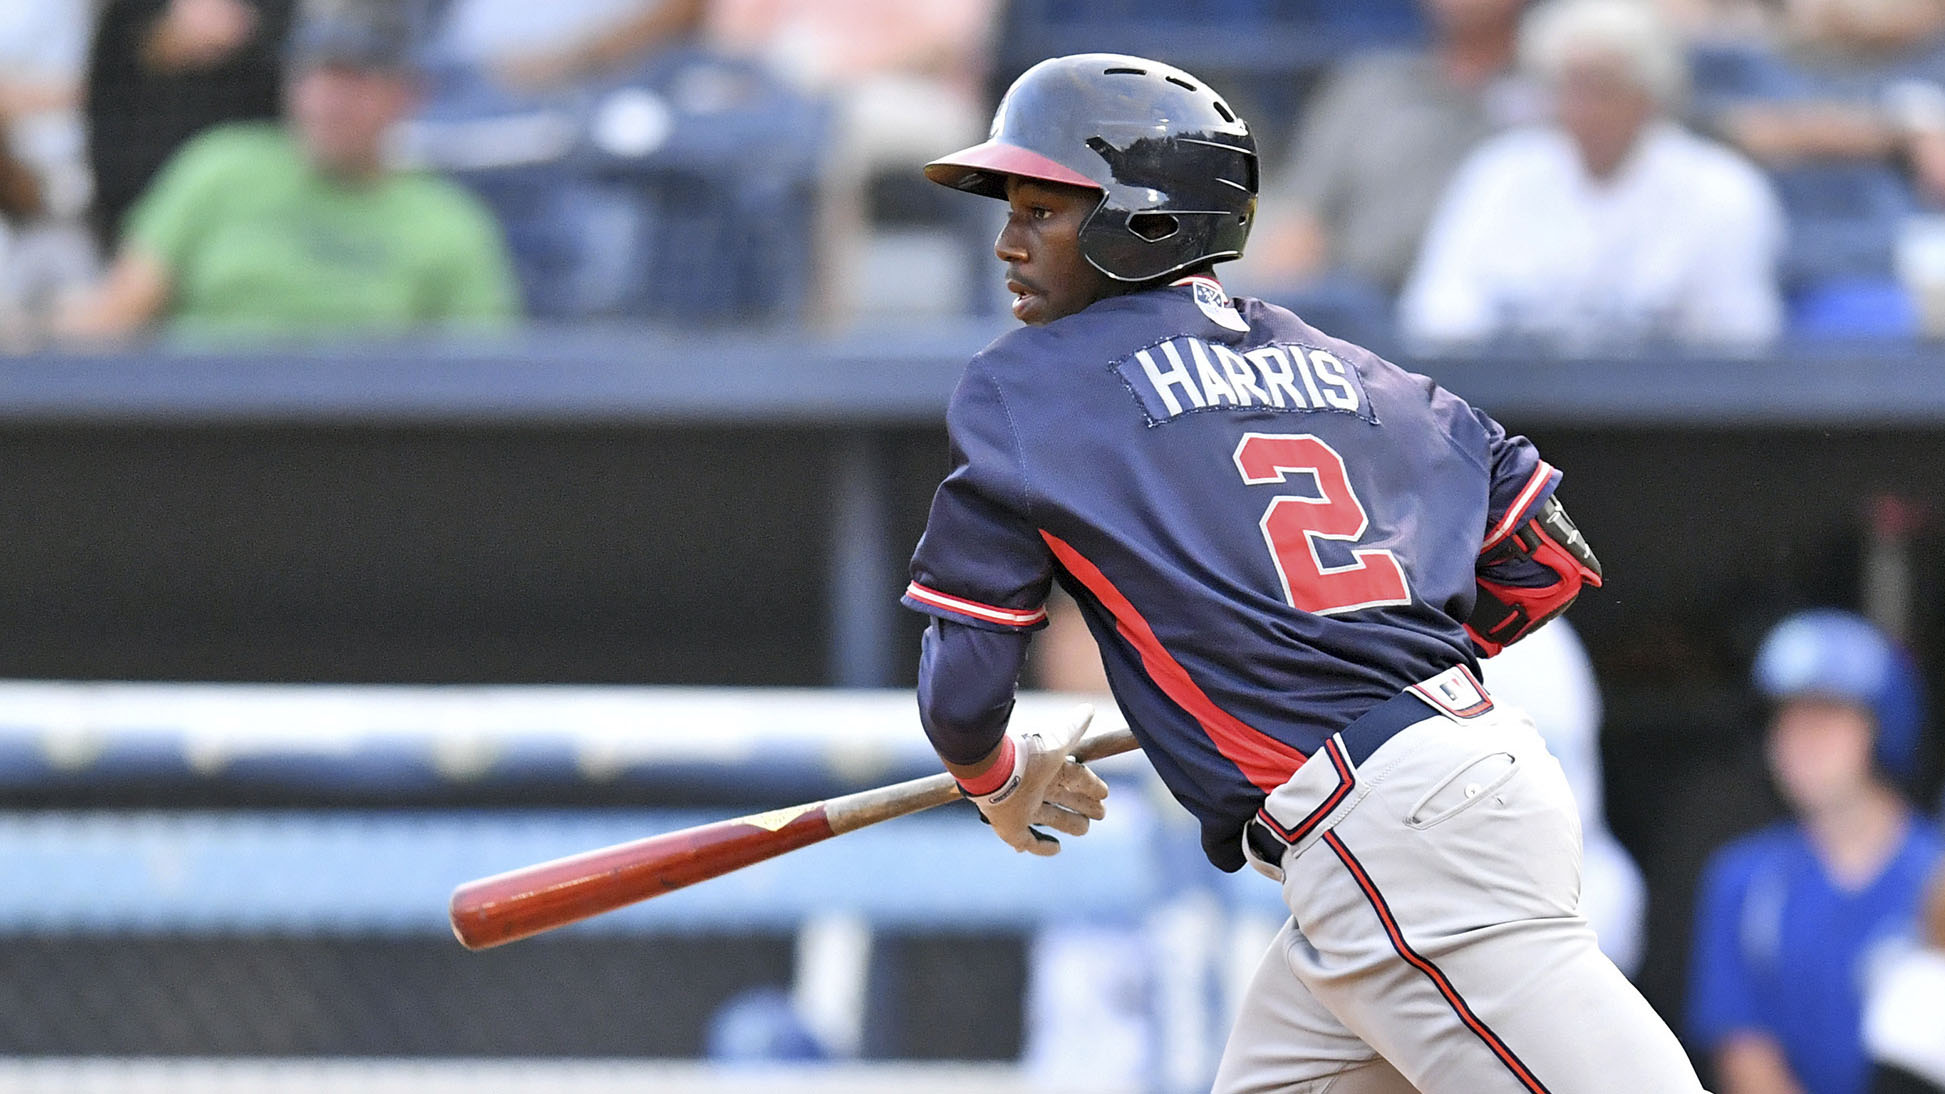 With minor leagues shut down, what's a young Braves prospect to do?